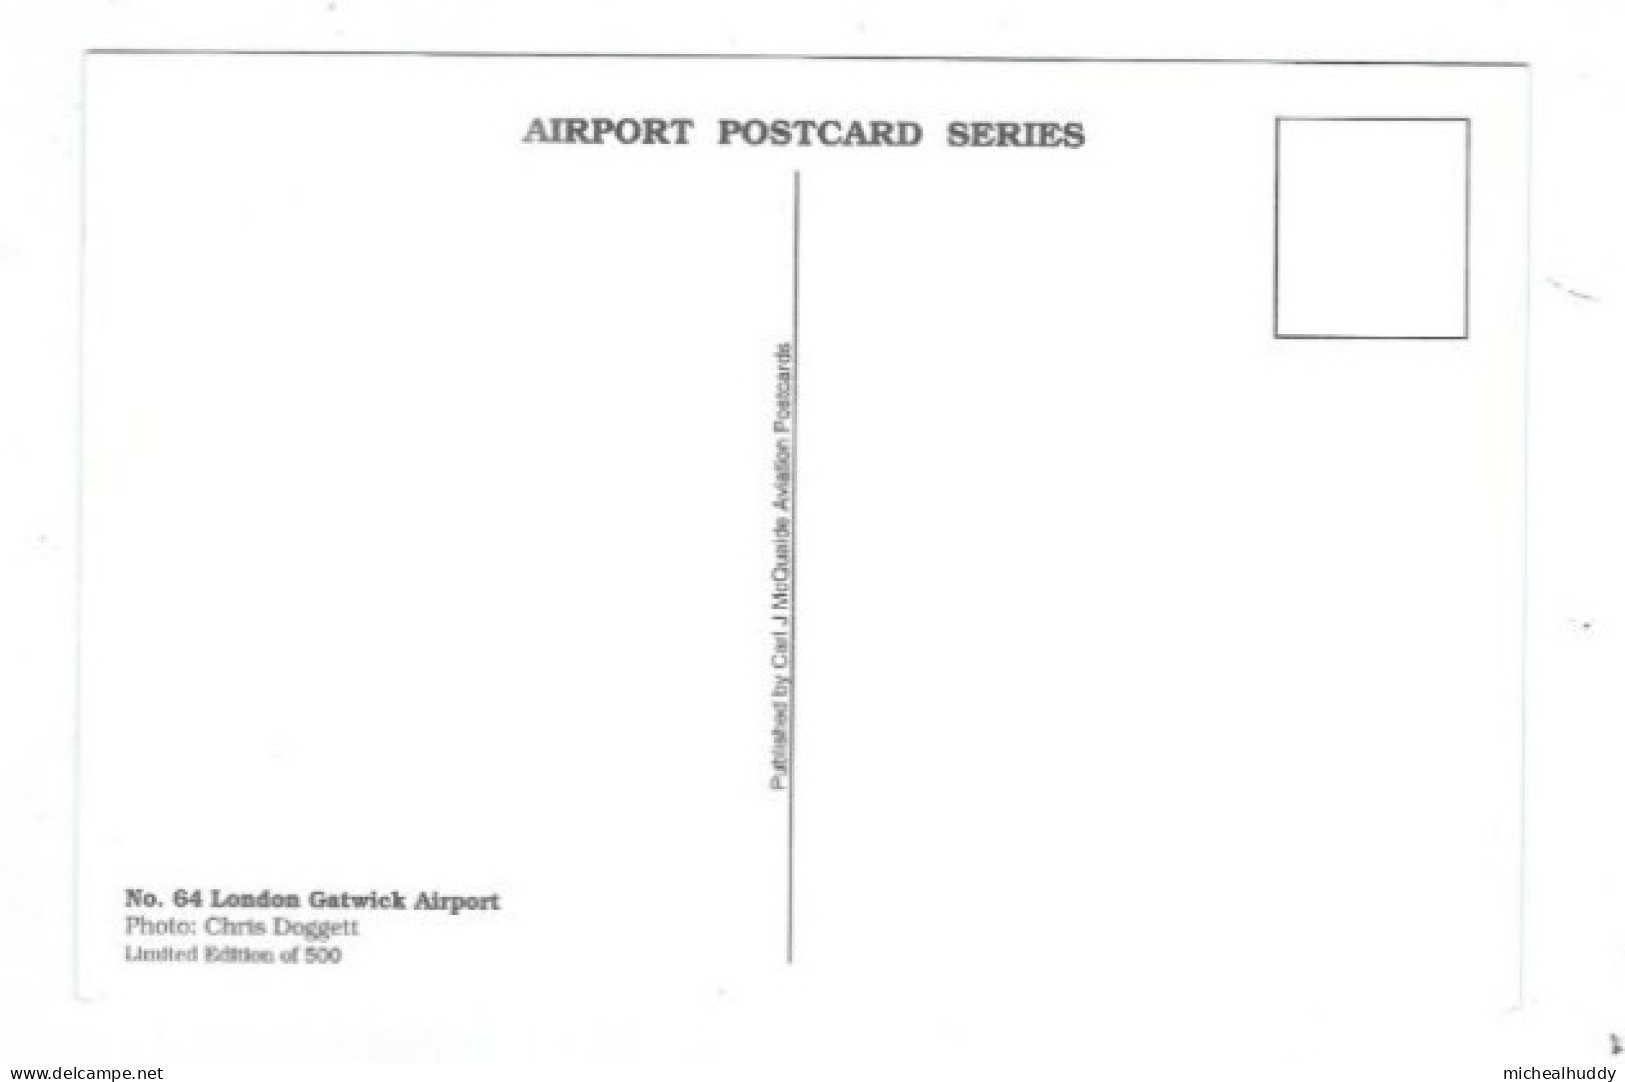 POSTCARD   PUBL BY  BY C MCQUAIDE IN HIS AIRPORT SERRIES  LONDON GATWICK  CARD N0 64 - Aerodrome